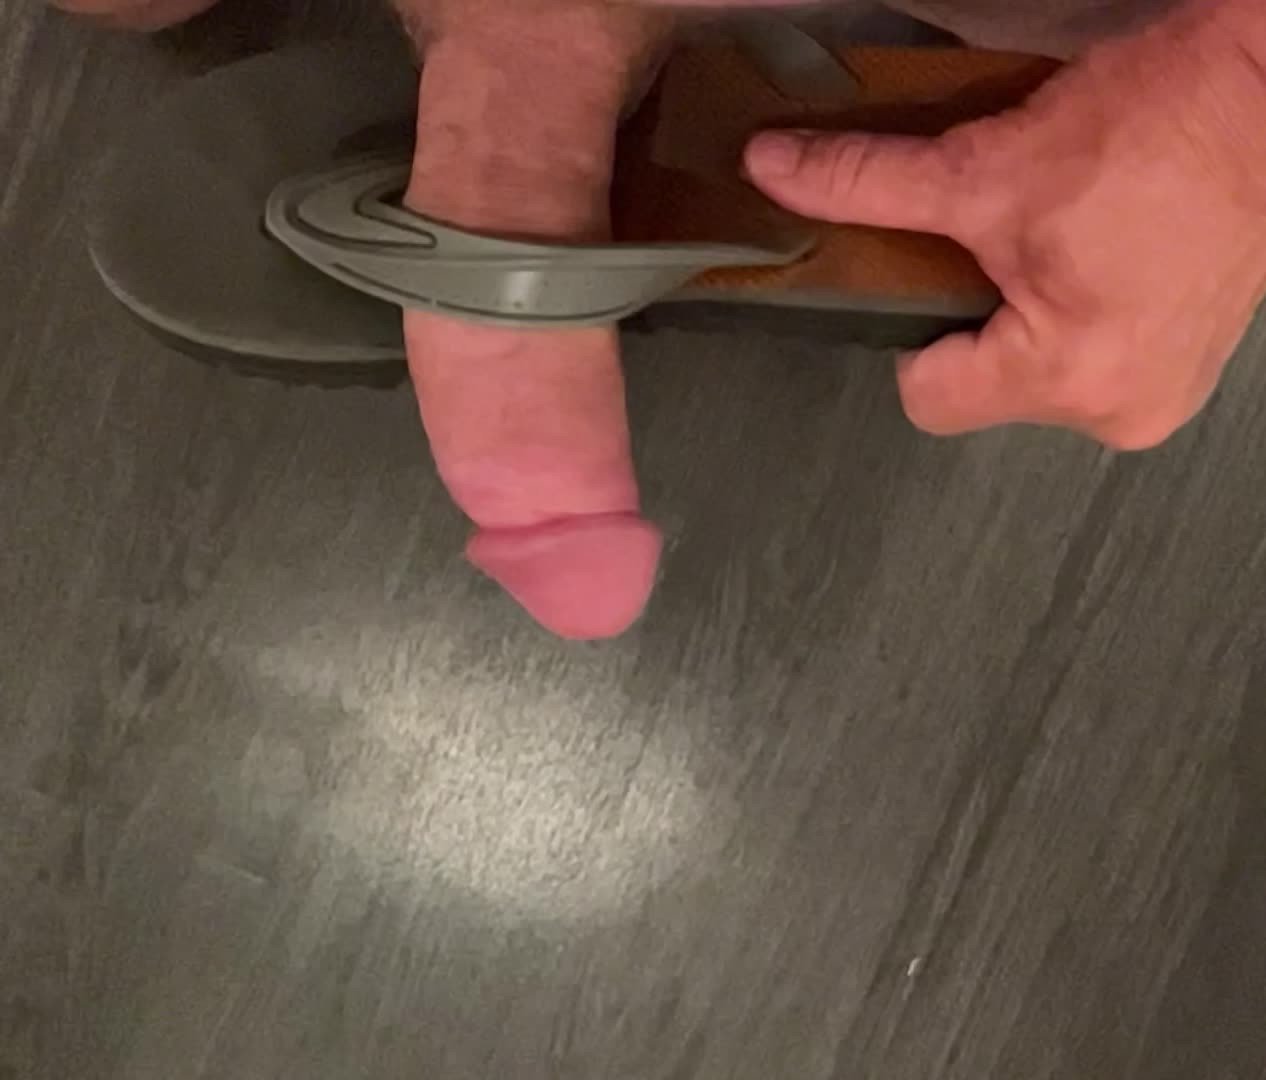 Video post by Men in Stockings, Nylons & knickers